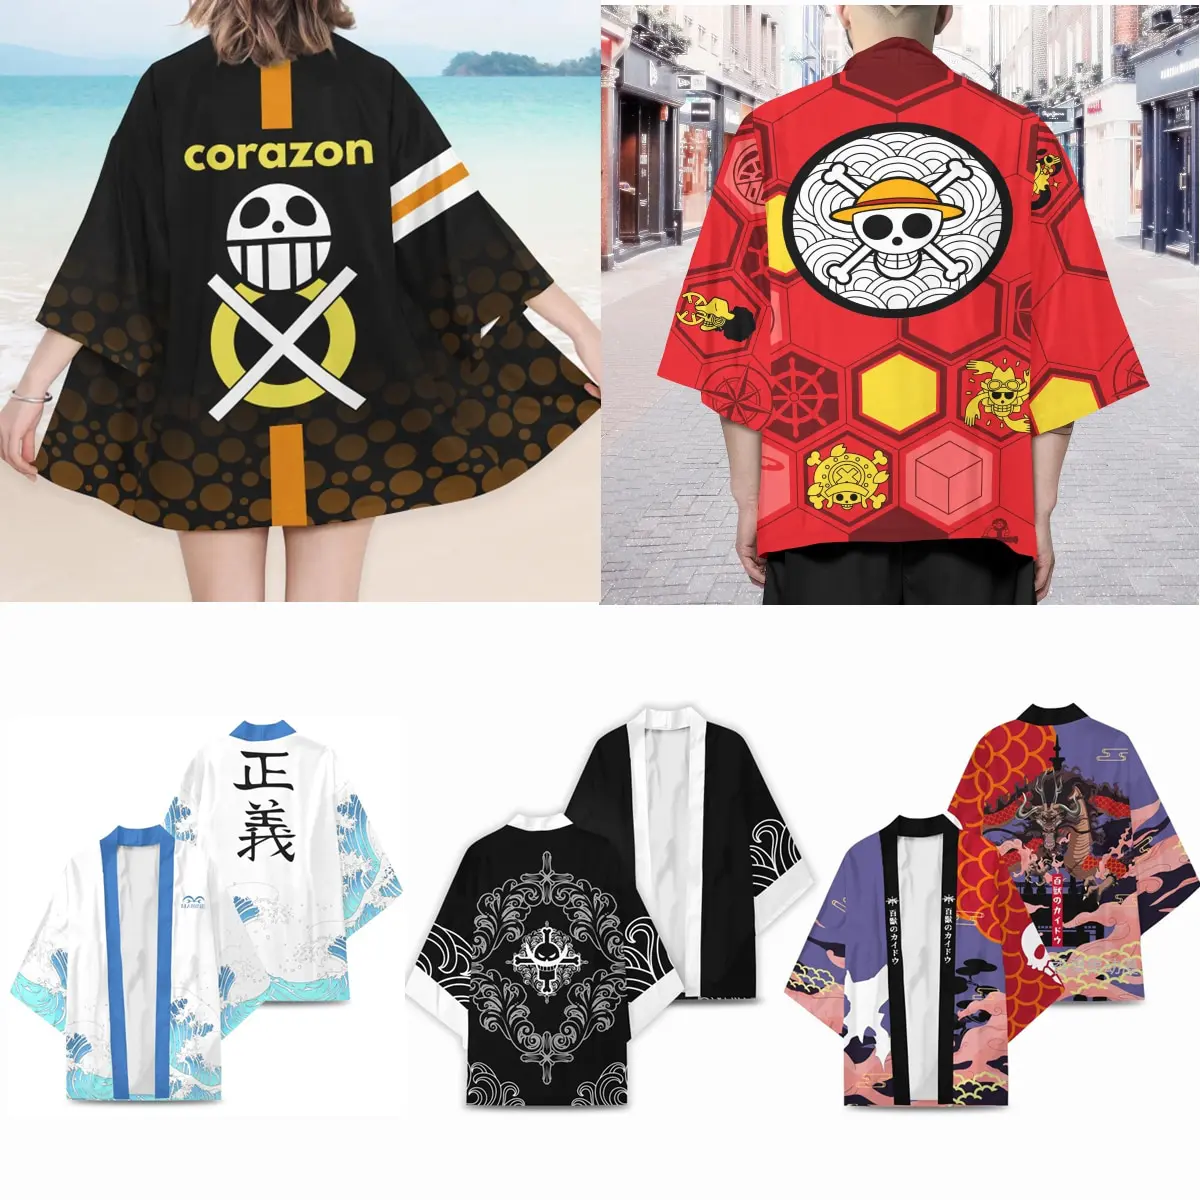 One Piece – Different Characters Themed Amazing Cloaks (7 Designs) Jackets & Coats